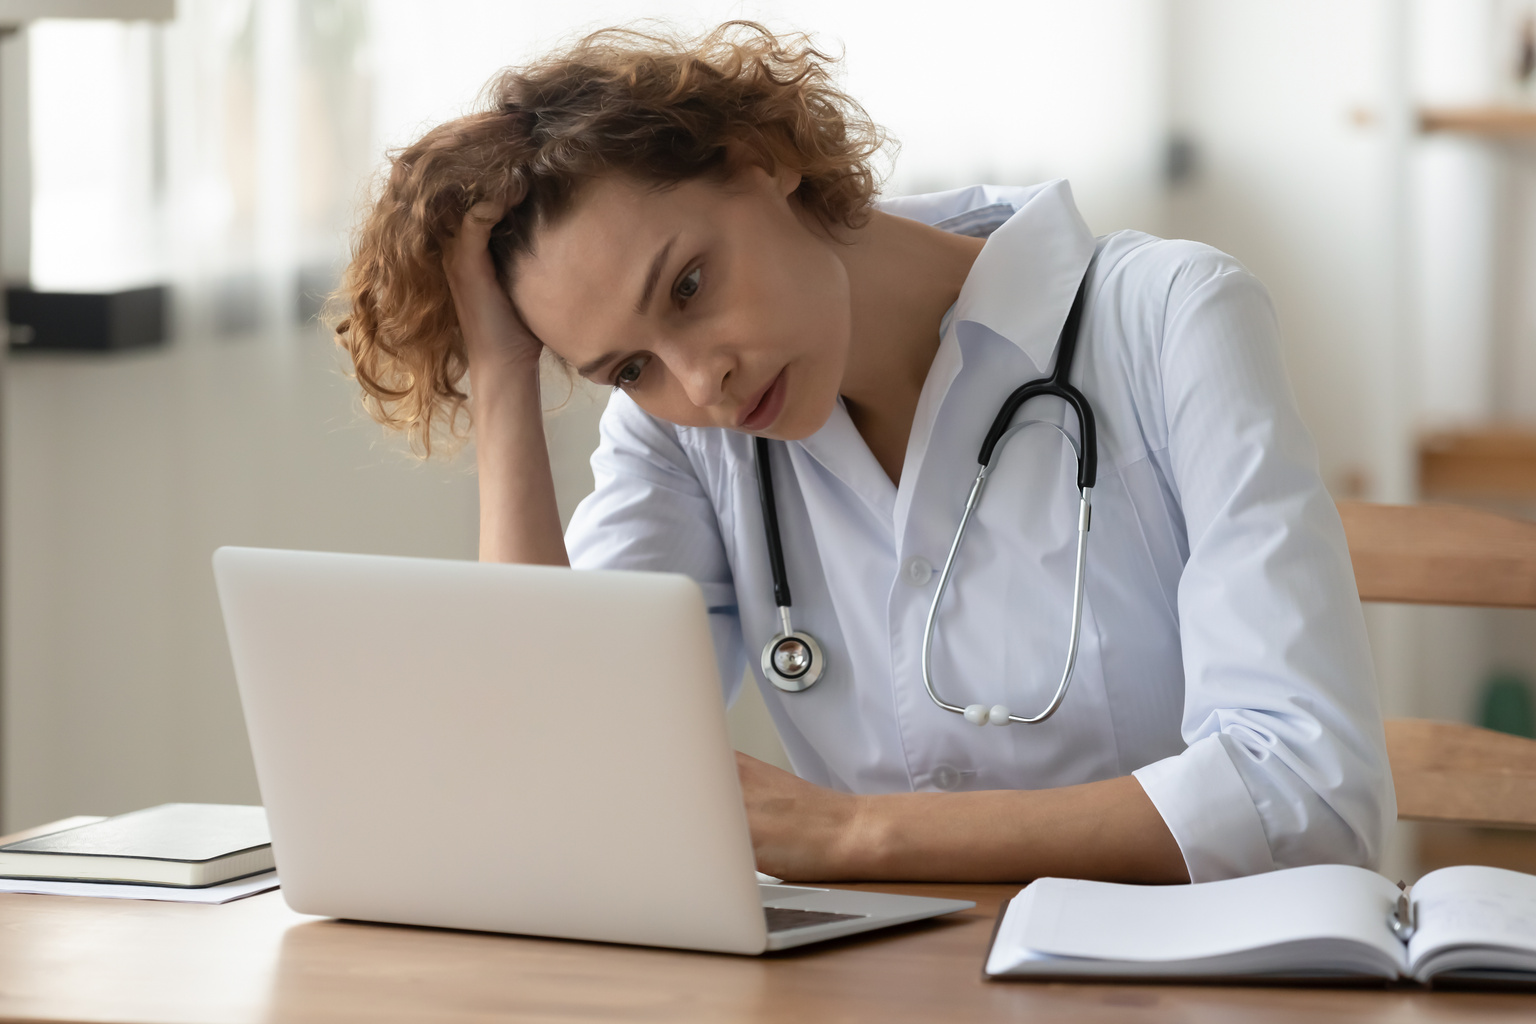 Examining clinician burnout in healthcare organizations – why it’s also an IT concern